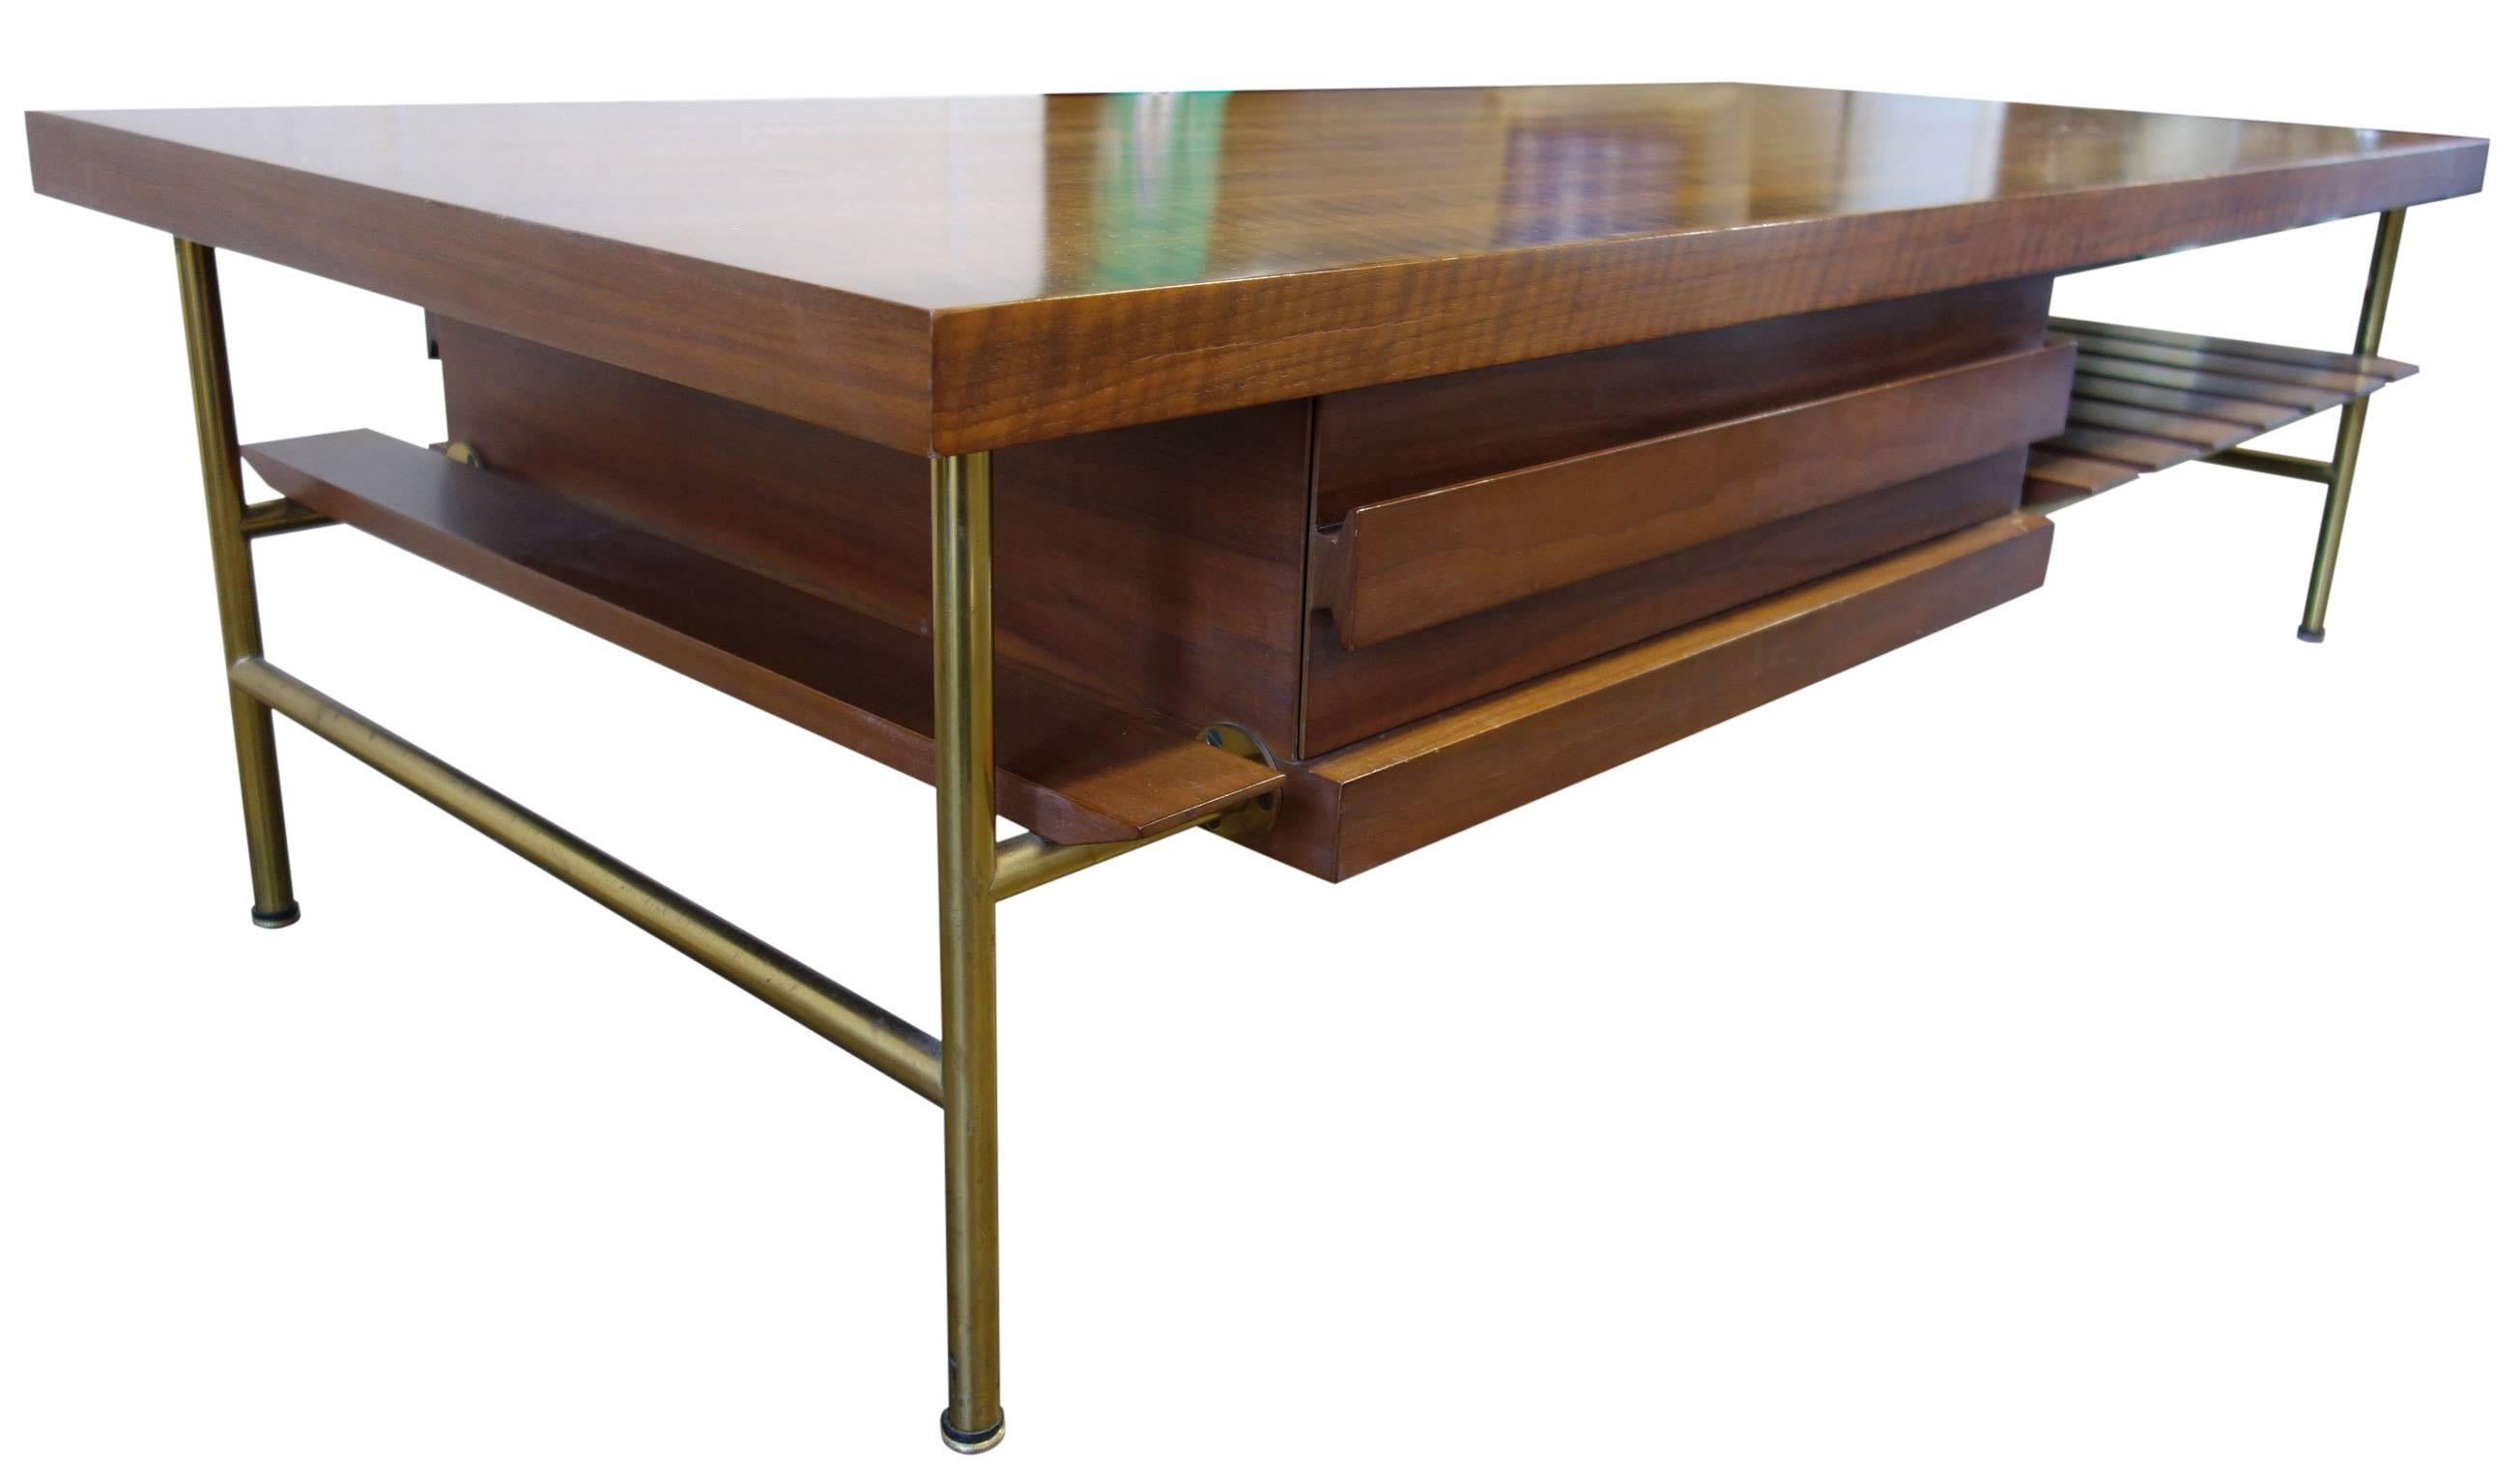 Rare coffee table (no. 2185) imported by M. Singer and Sons. Beautiful brass and Italian walnut details. 

One of the most influential Mid-Century Italian designers. Architect Ico Parisi also collaborated with his wife Luisa and his teacher Gio